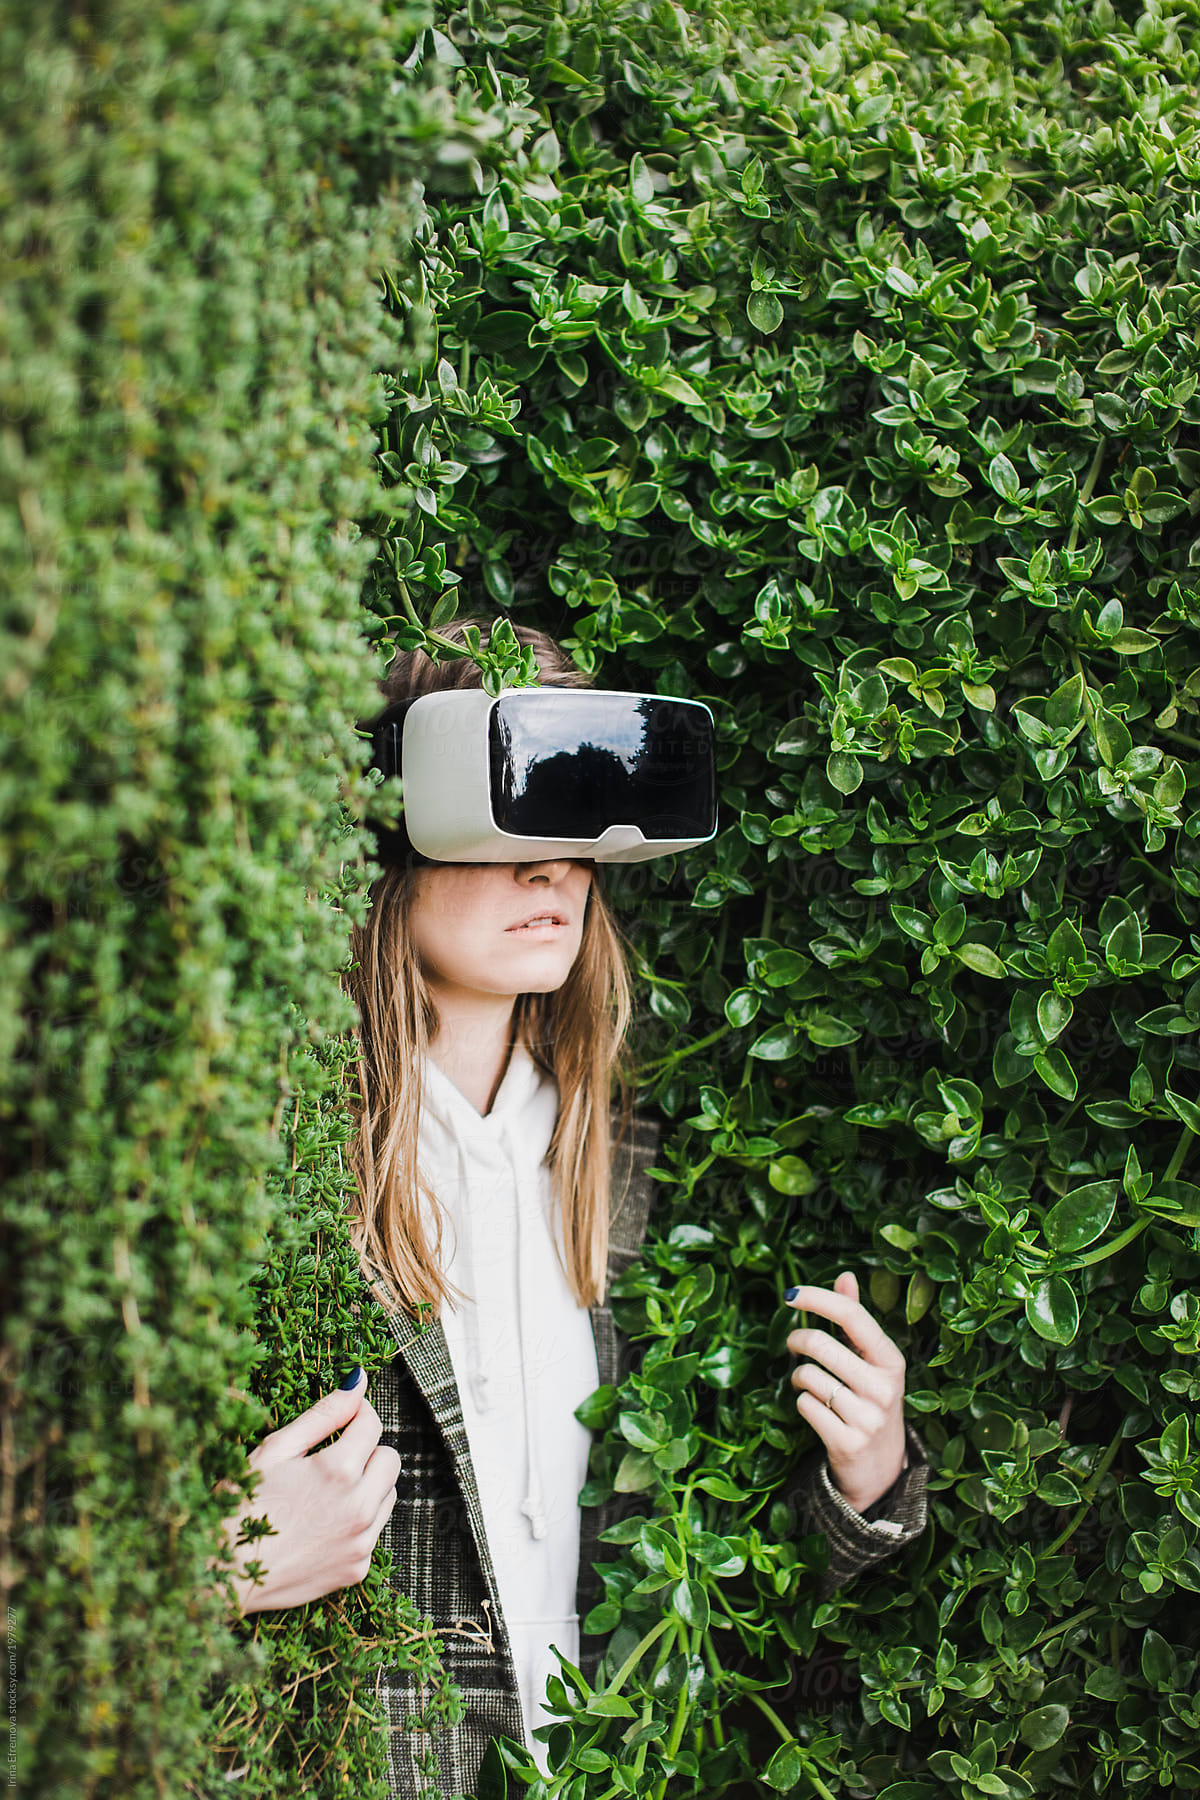 Blond girl in VR headset trapped in a green hedge